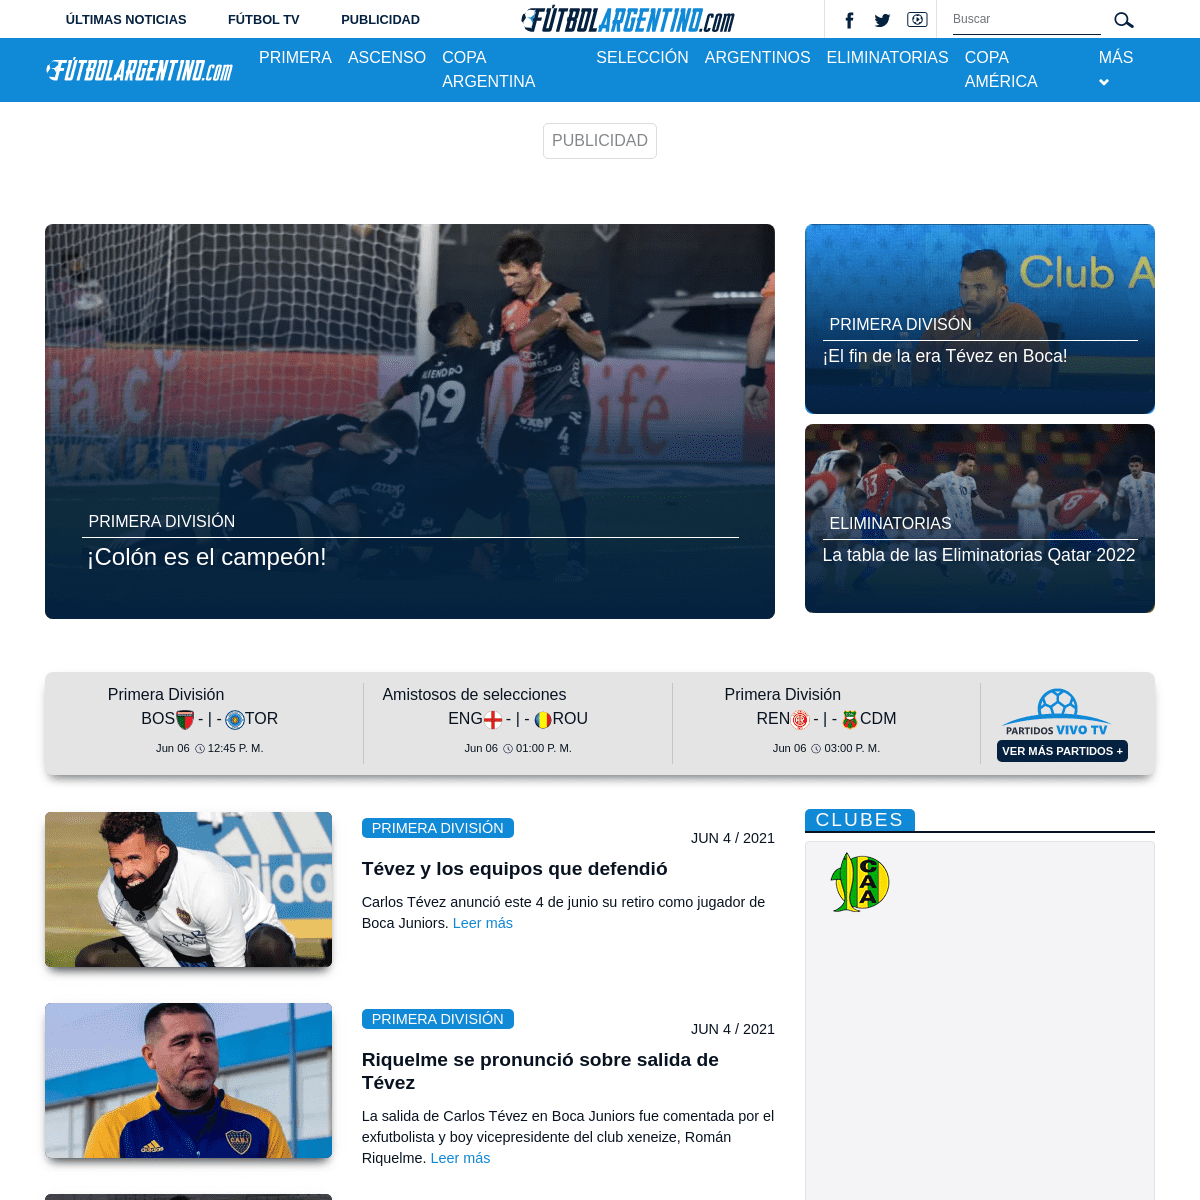 A complete backup of https://futbolargentino.com